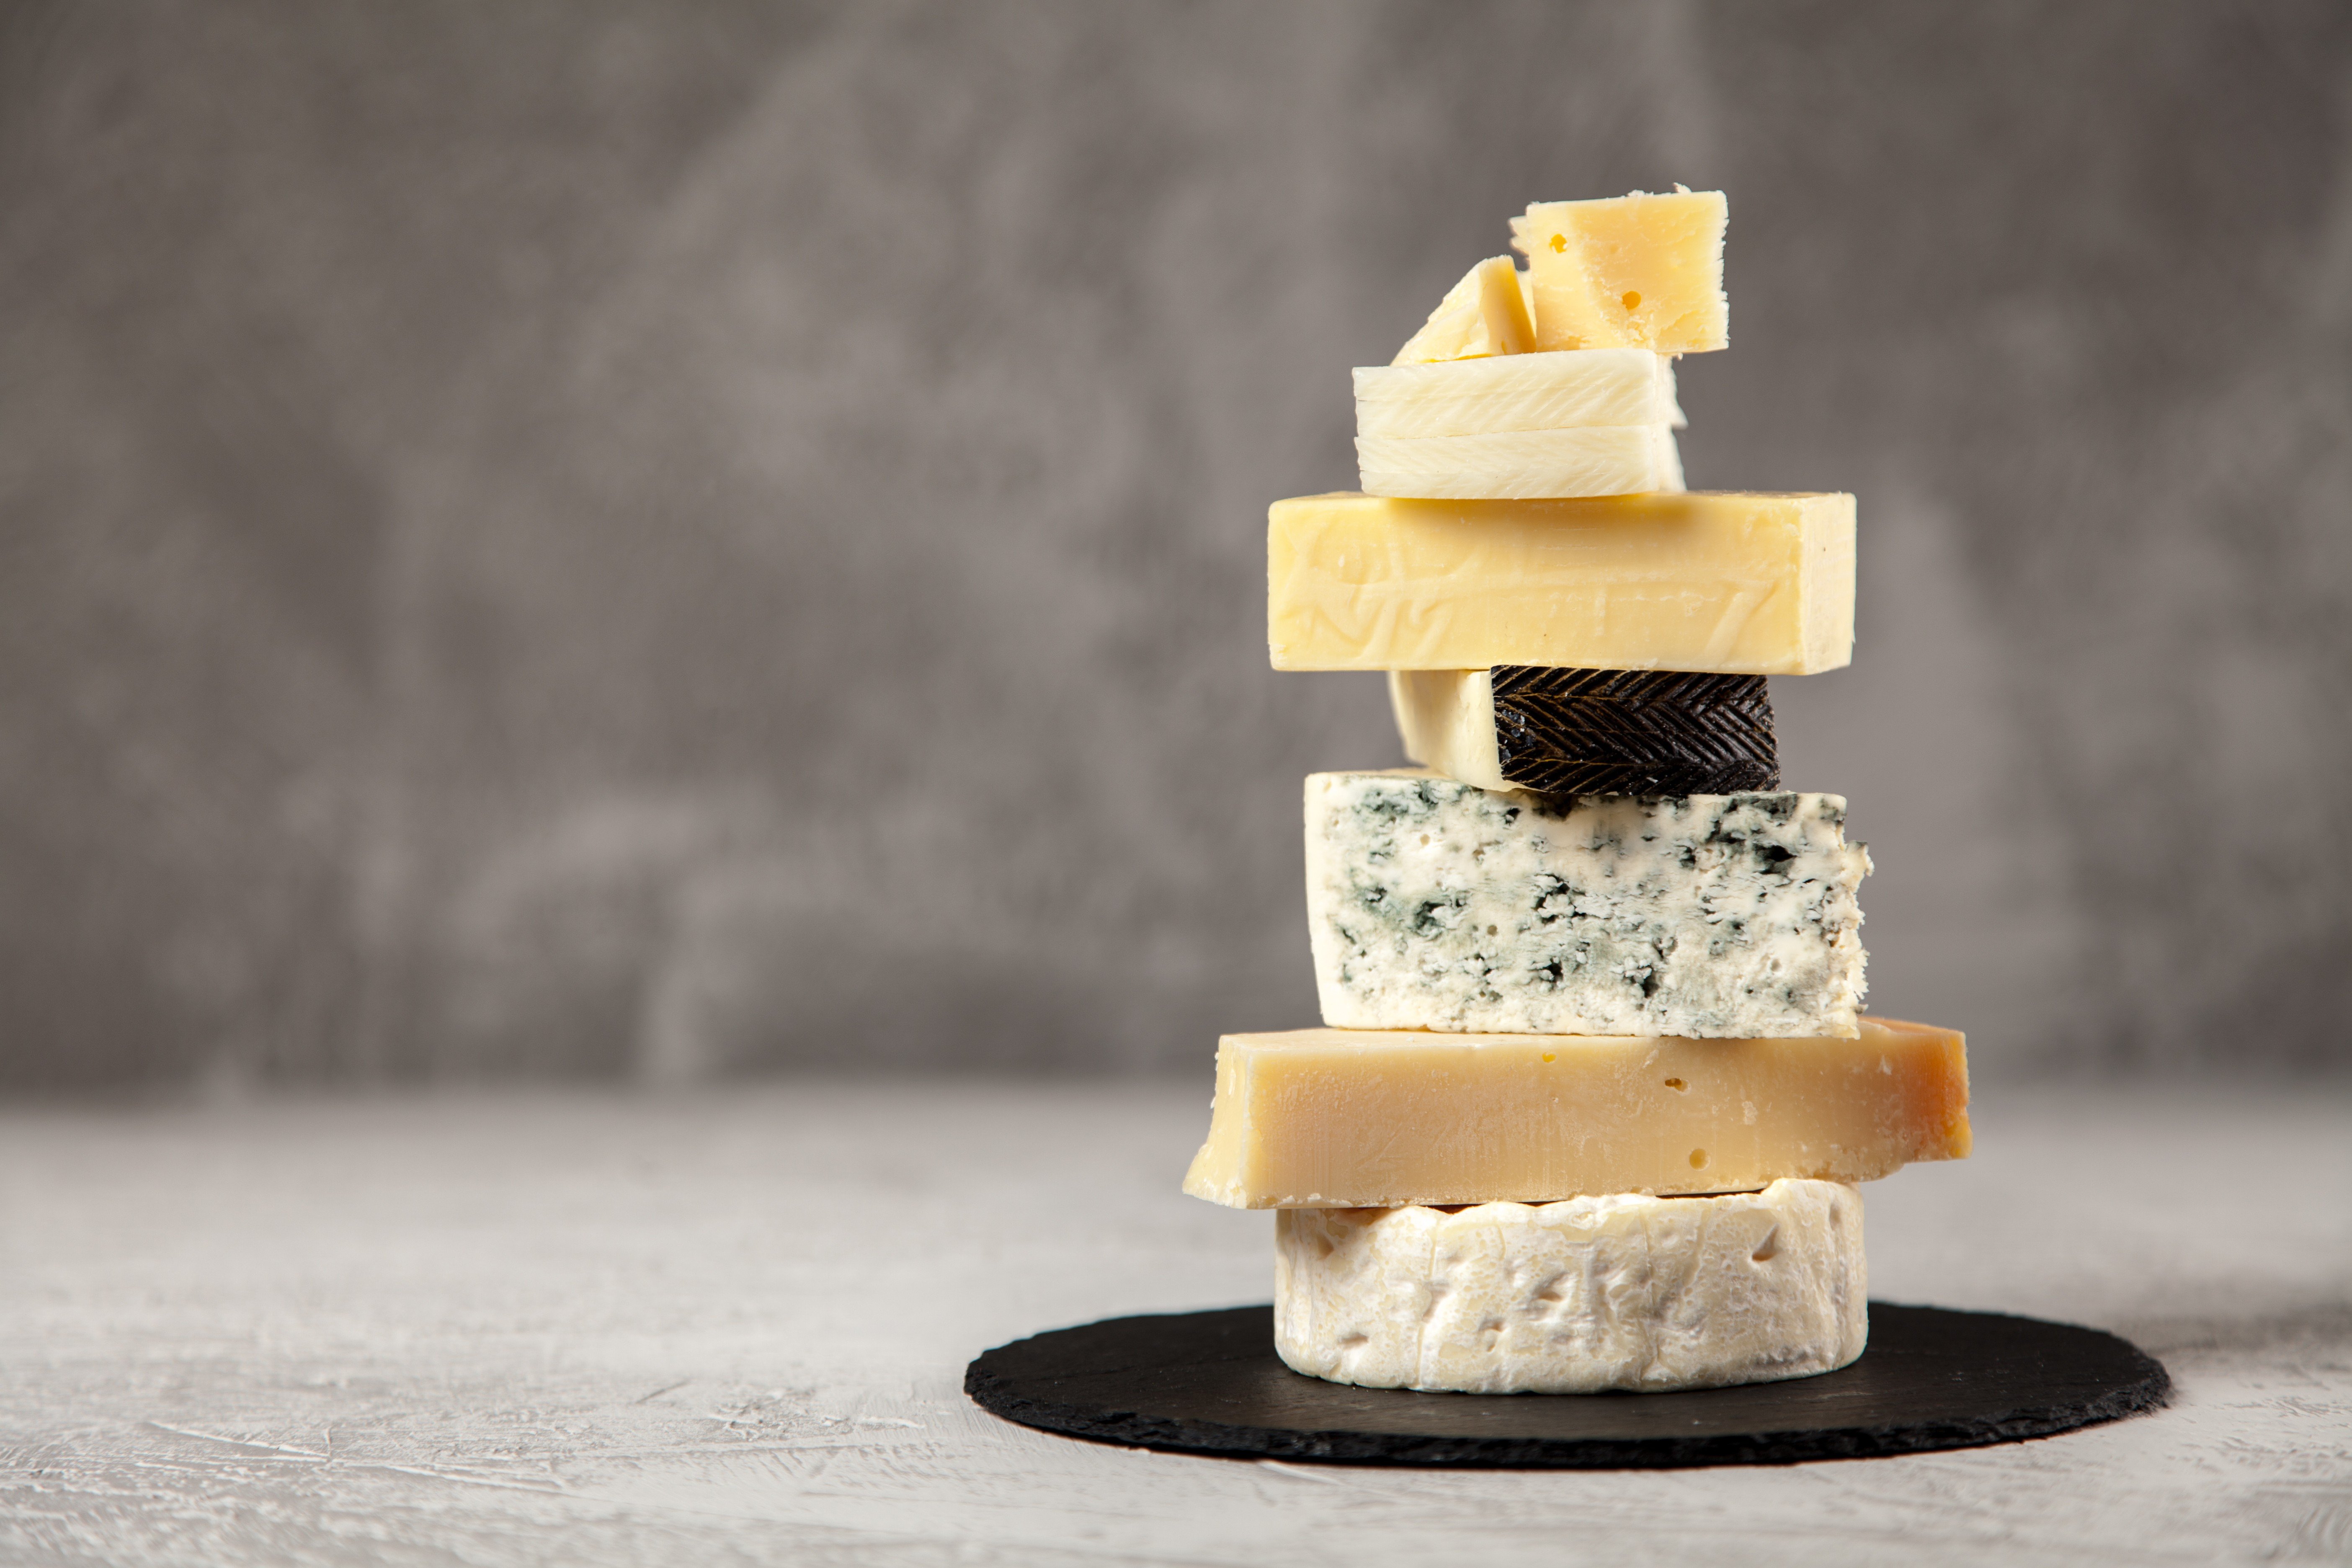 Brie, Cheddar, Stilton ... which is the most beneficial when it comes to your health?